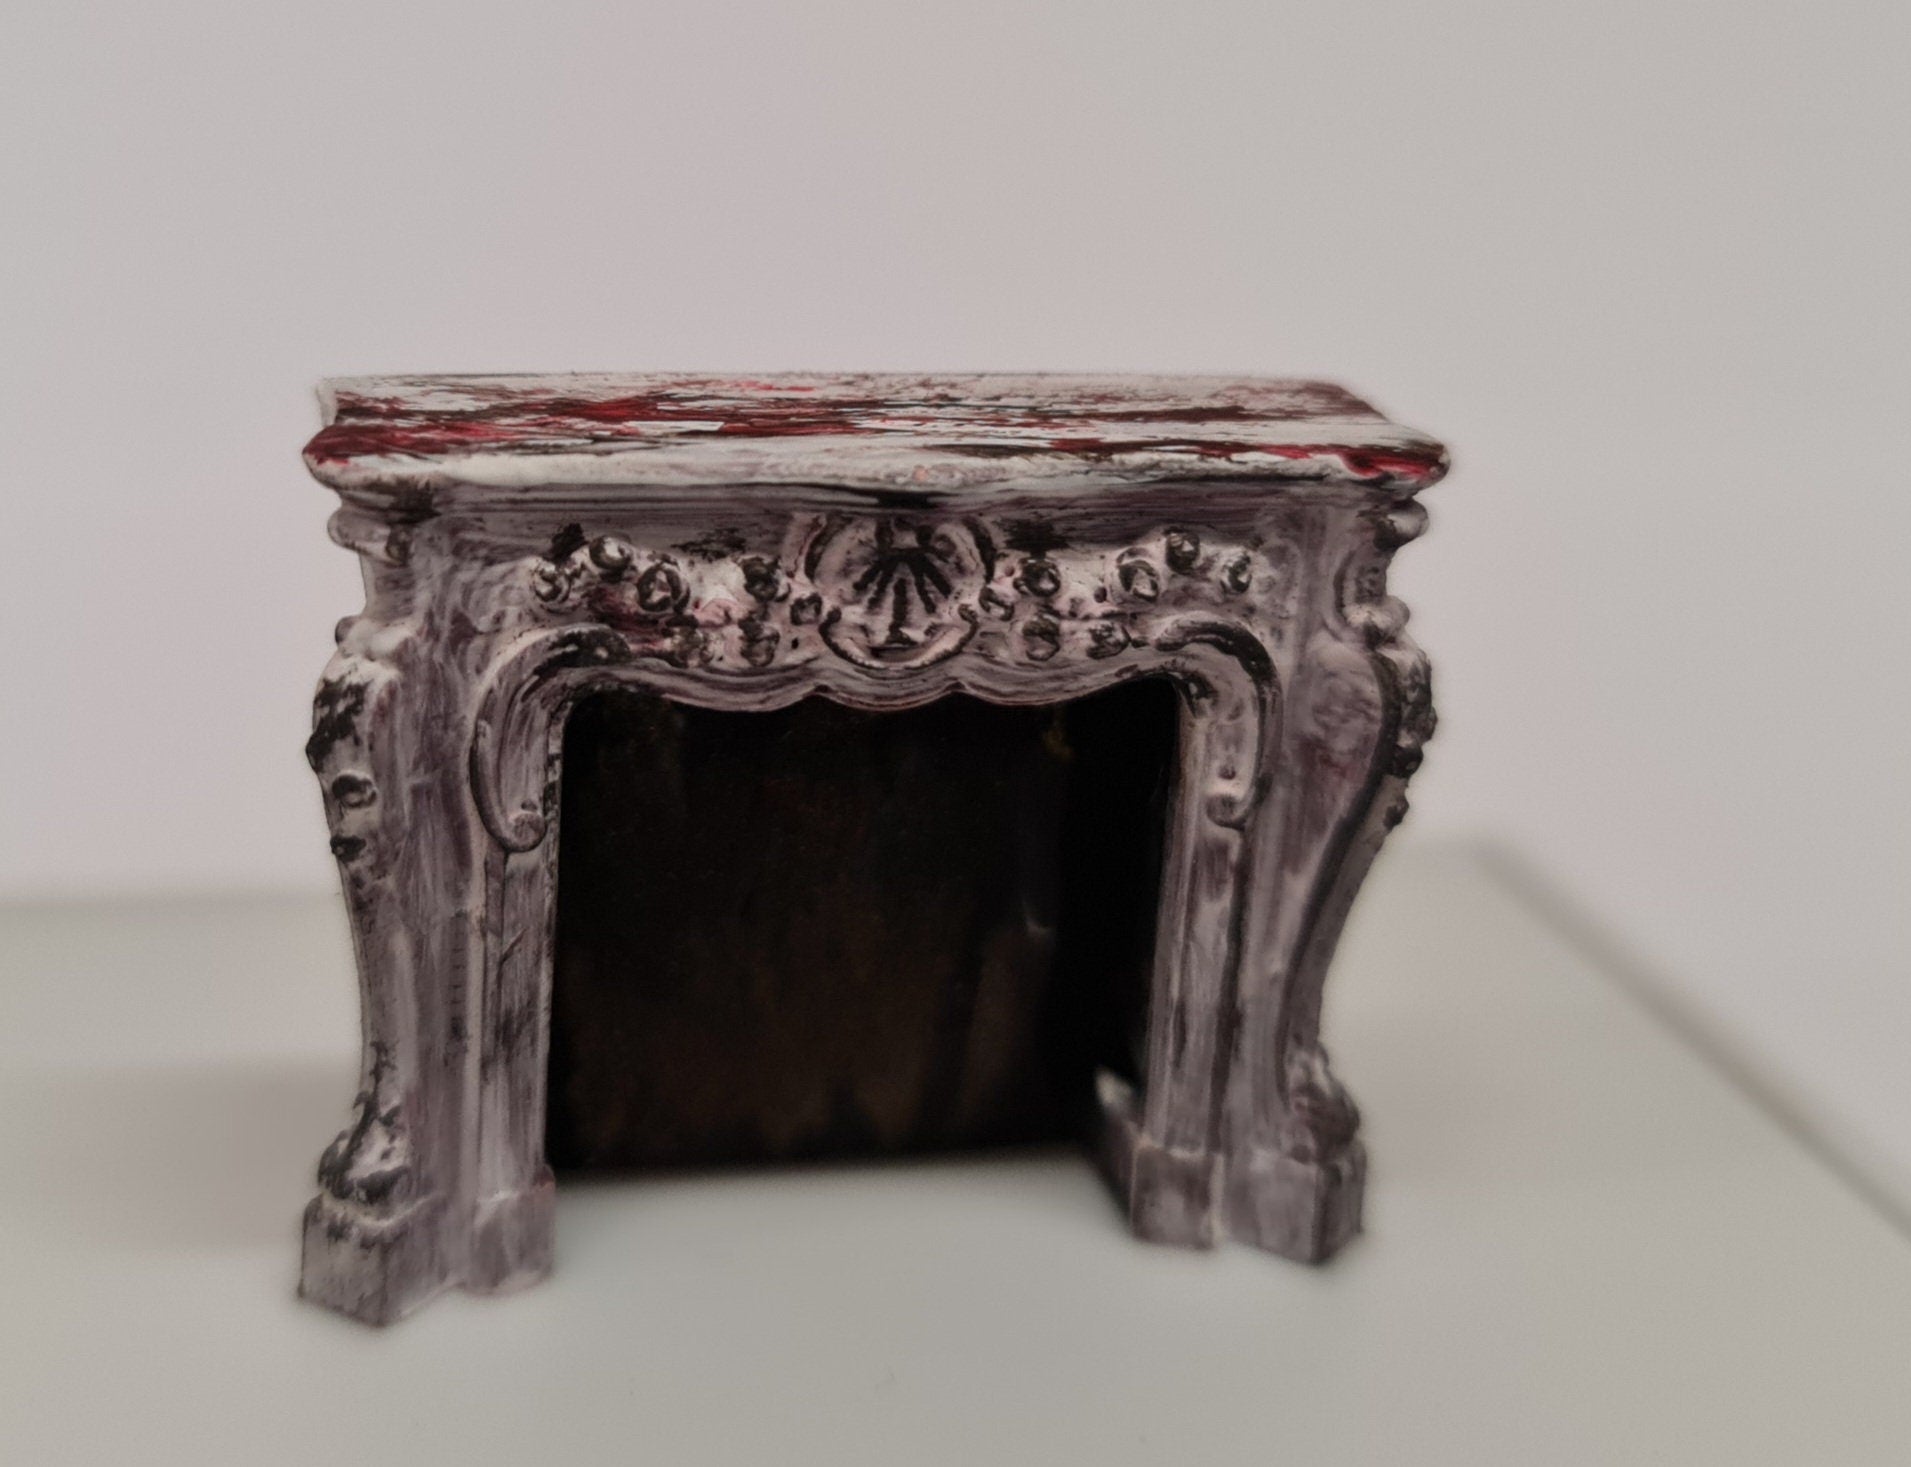 Baroque Furniture Set 3D printed in 1;48th scale